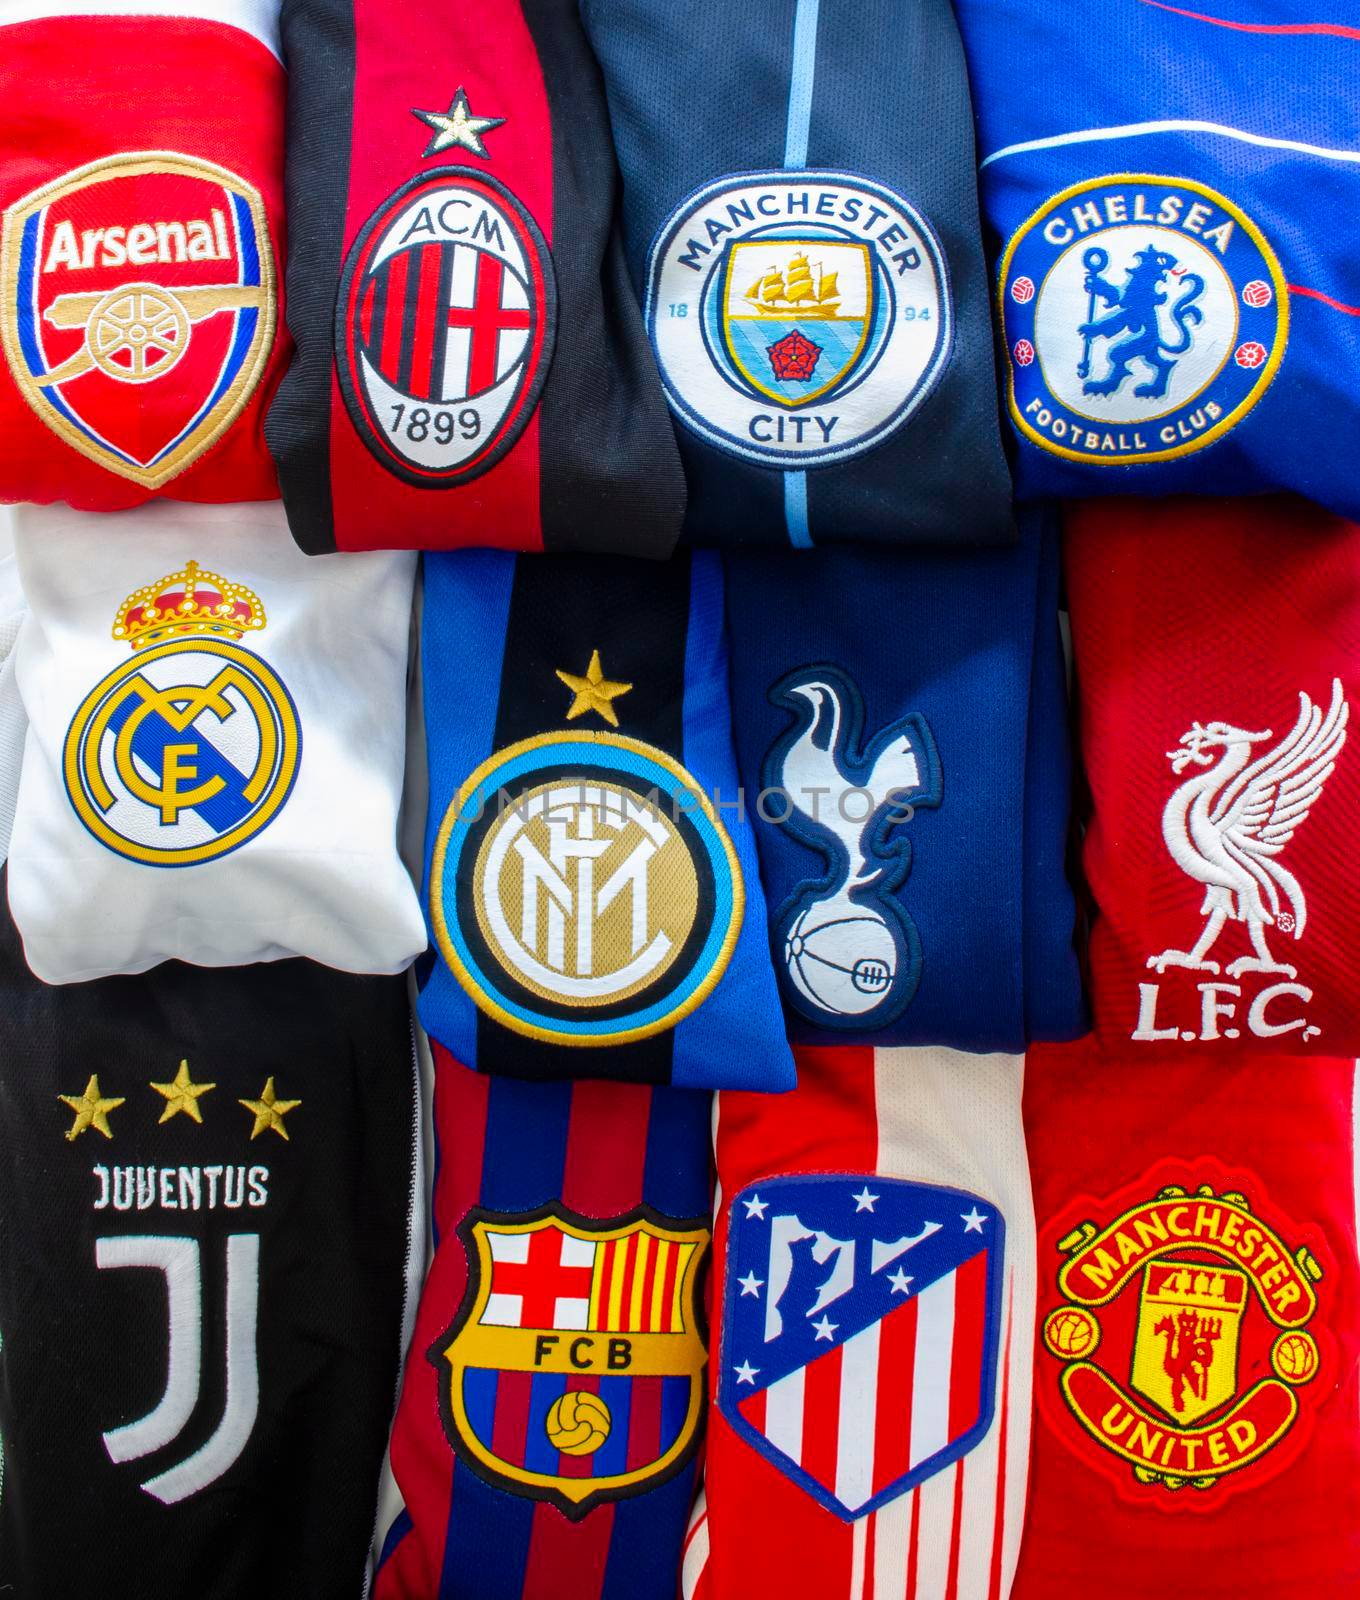 Chamartín, Madrid, Spain. April 19, 2021. Vertical view of The Super League or European Super League teams jerseys. annual club football competition to be contested by an exclusive group of top European football clubs.